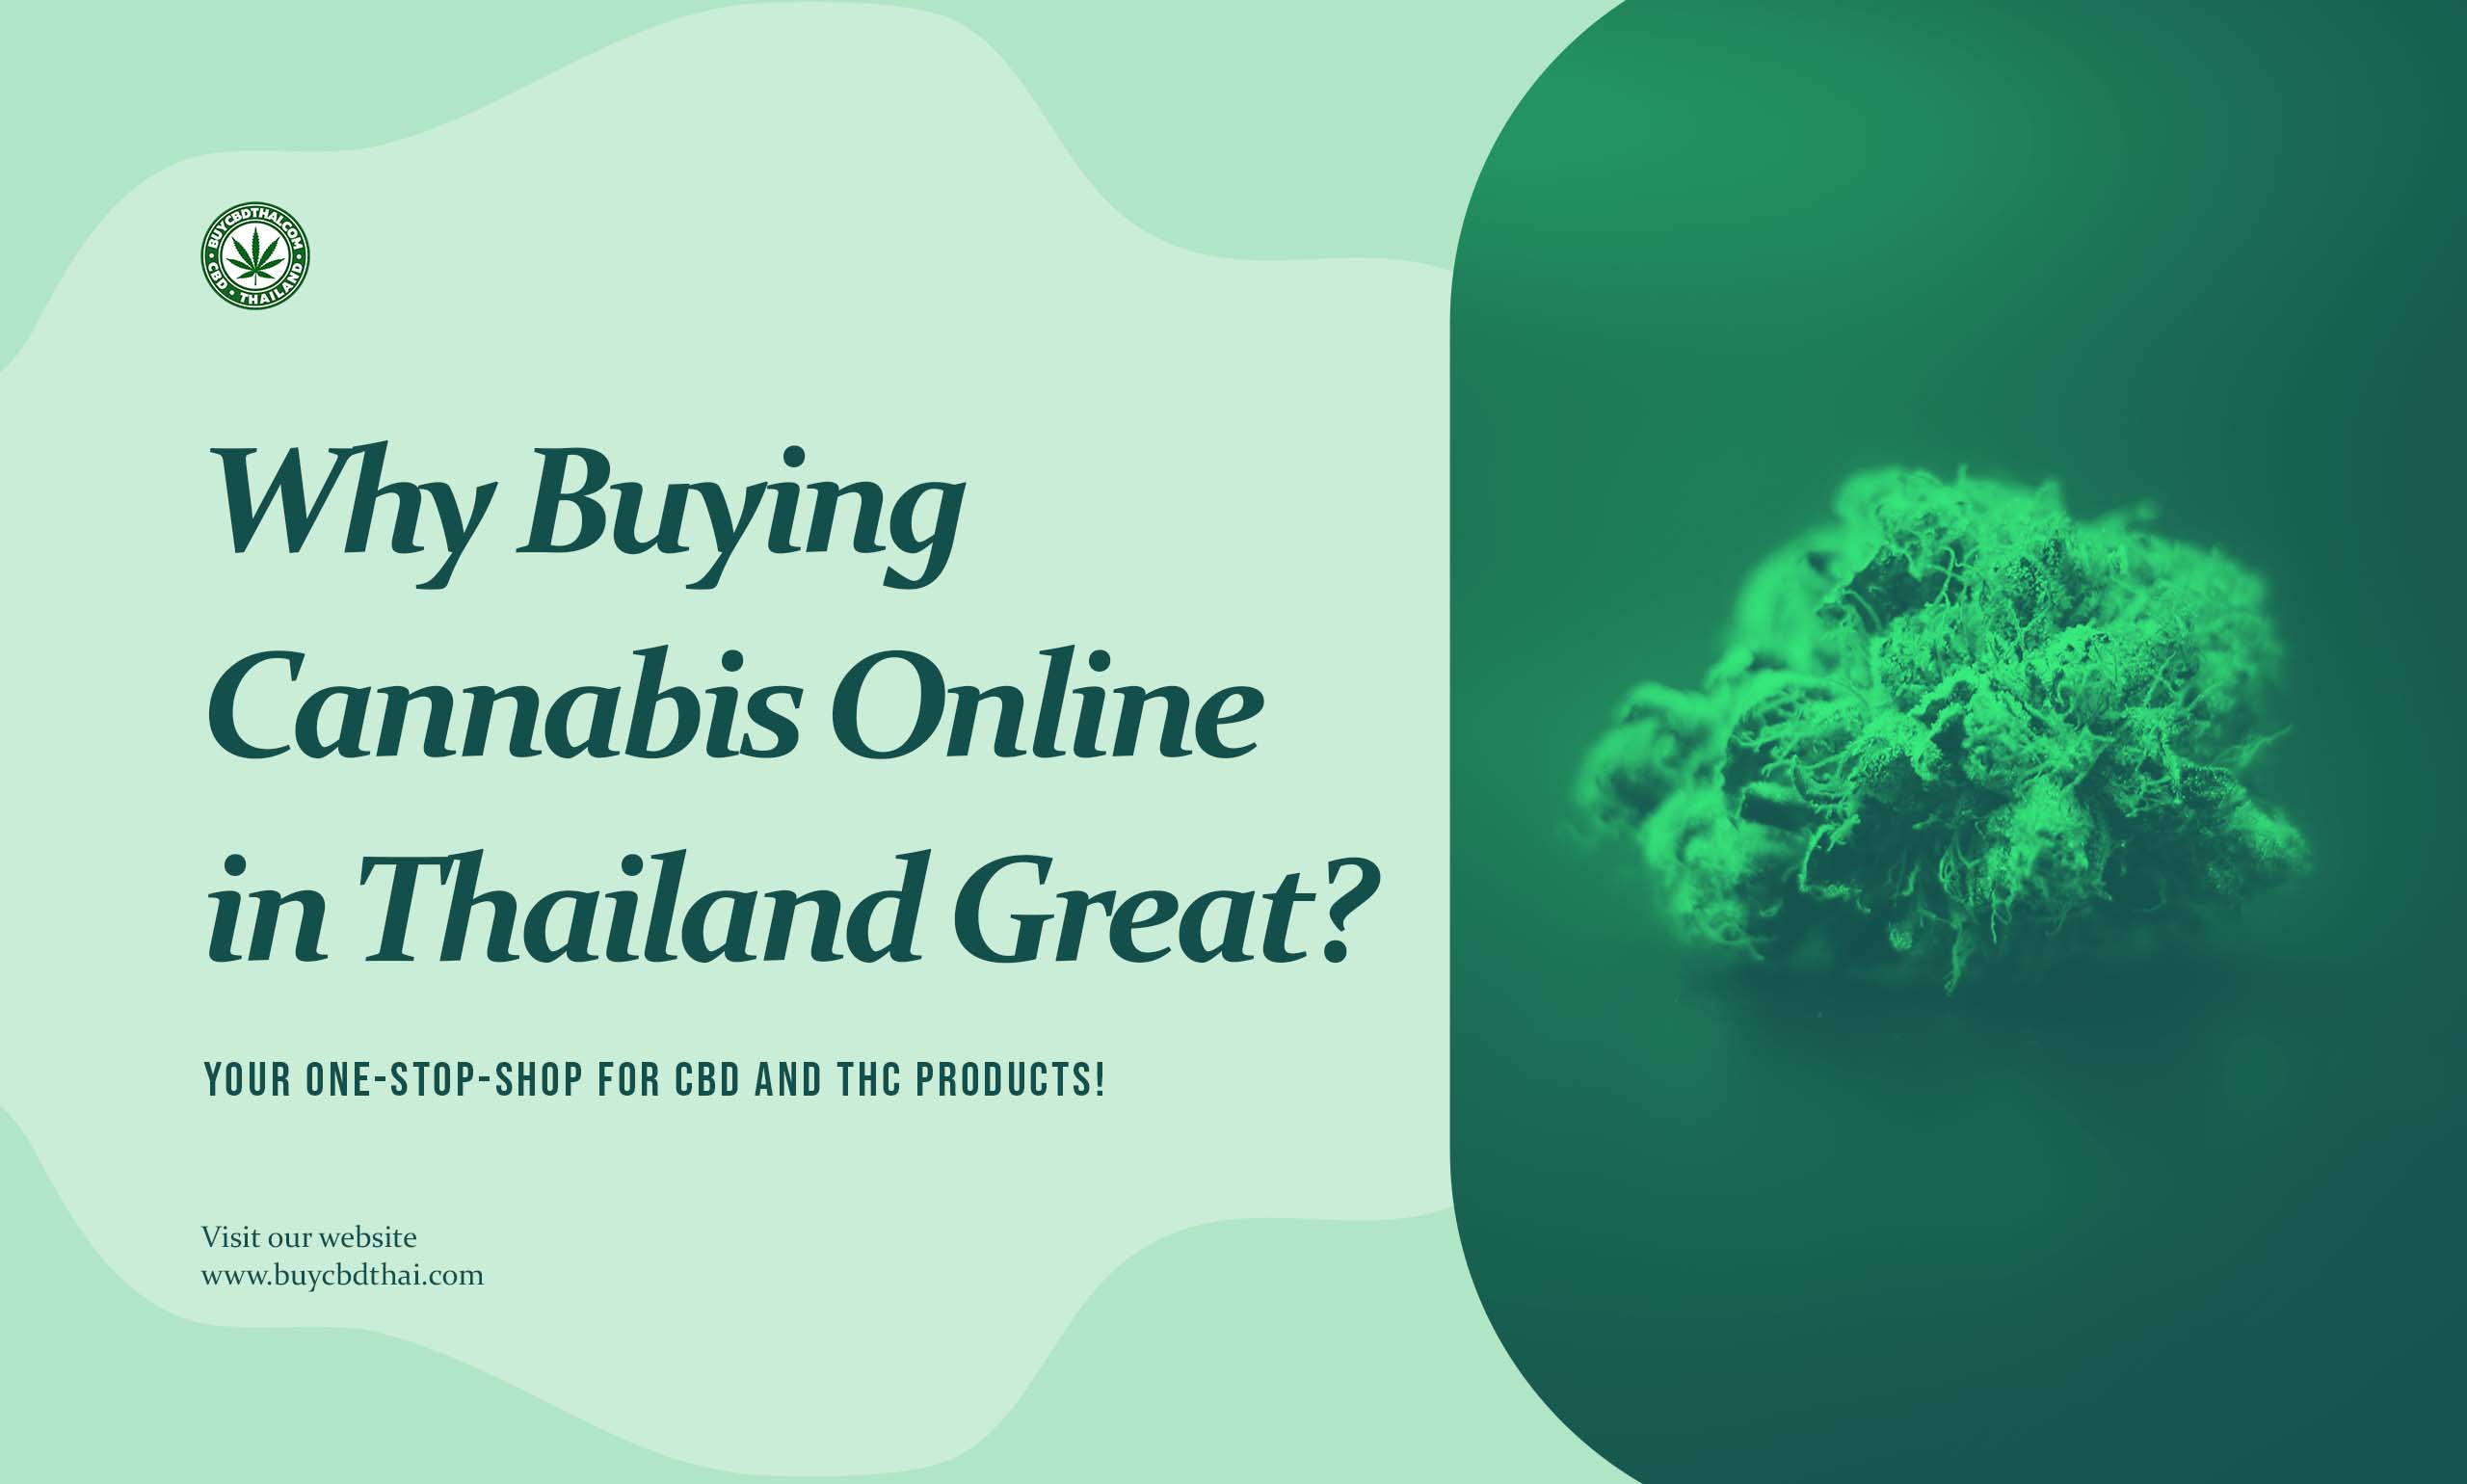 Why Buying Cannabis Products Online in Thailand Great?